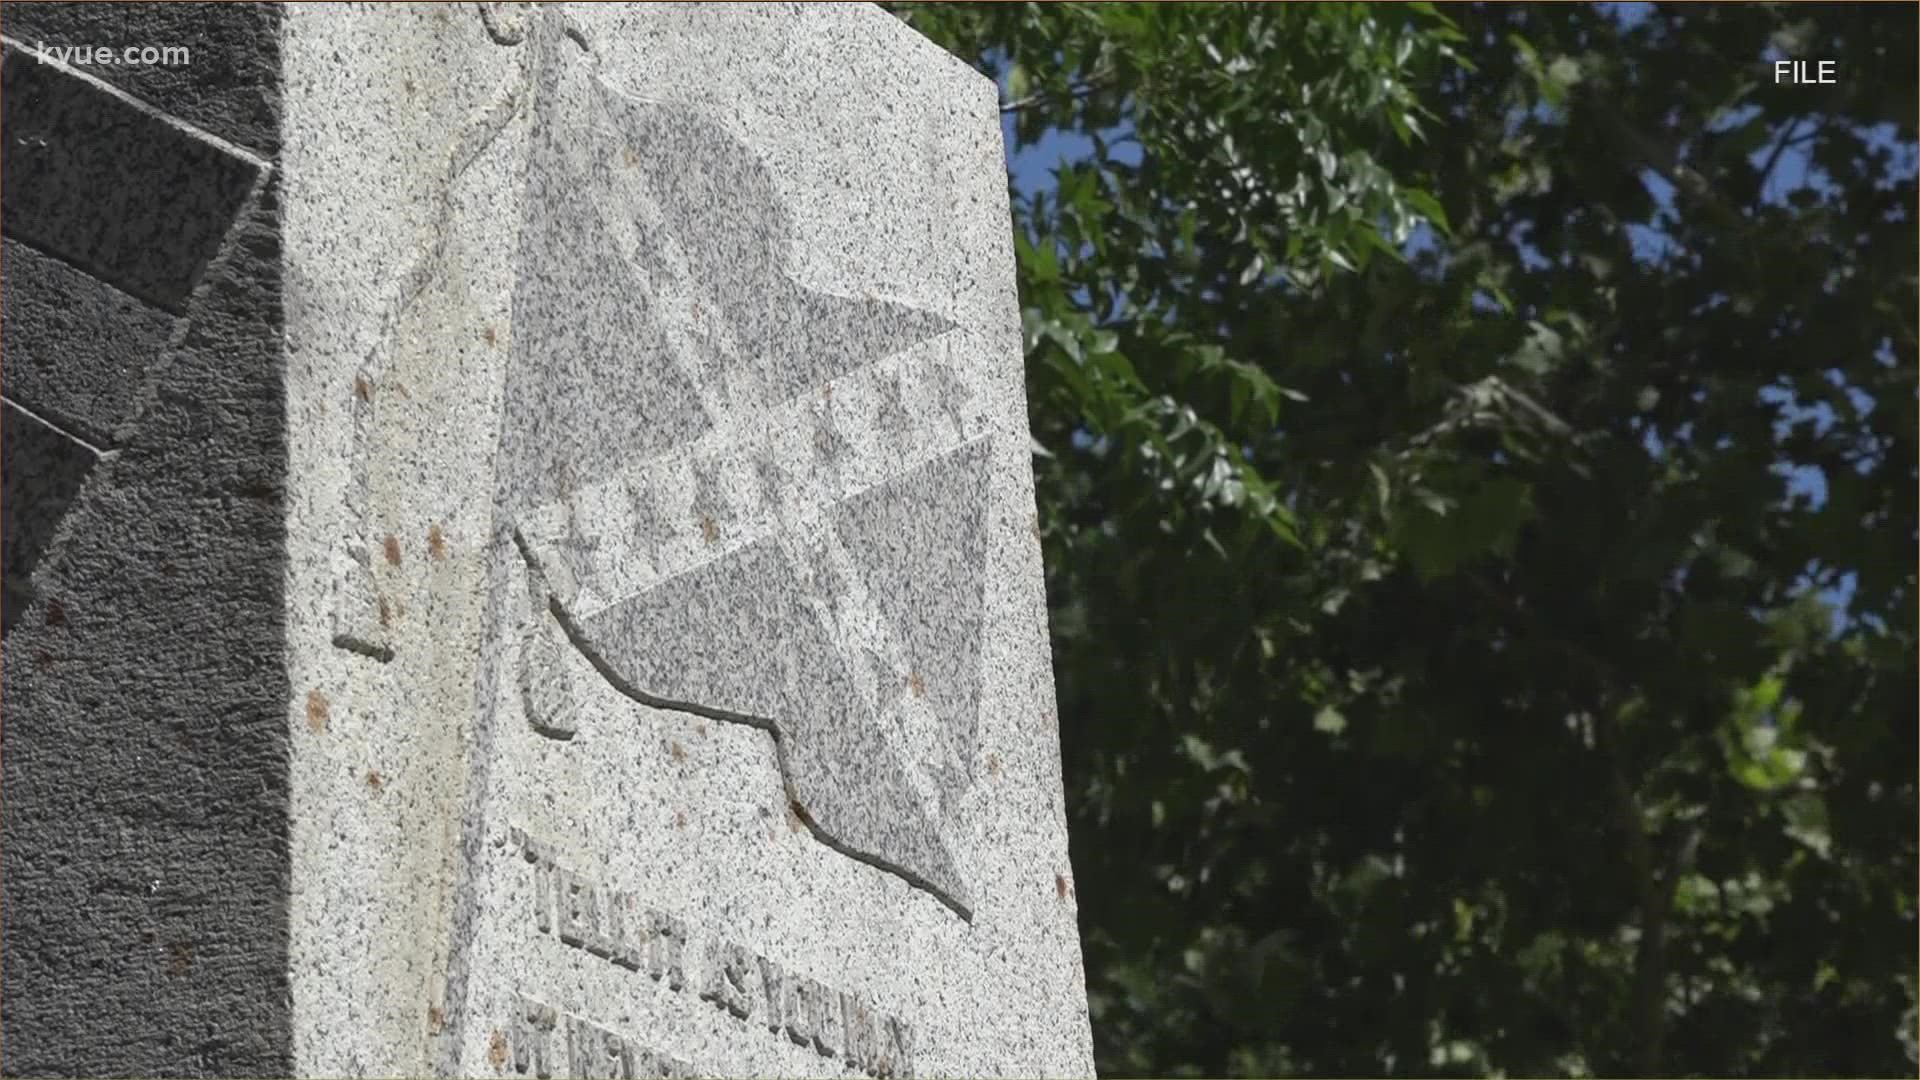 A Confederate monument is no longer at the Caldwell County Courthouse.